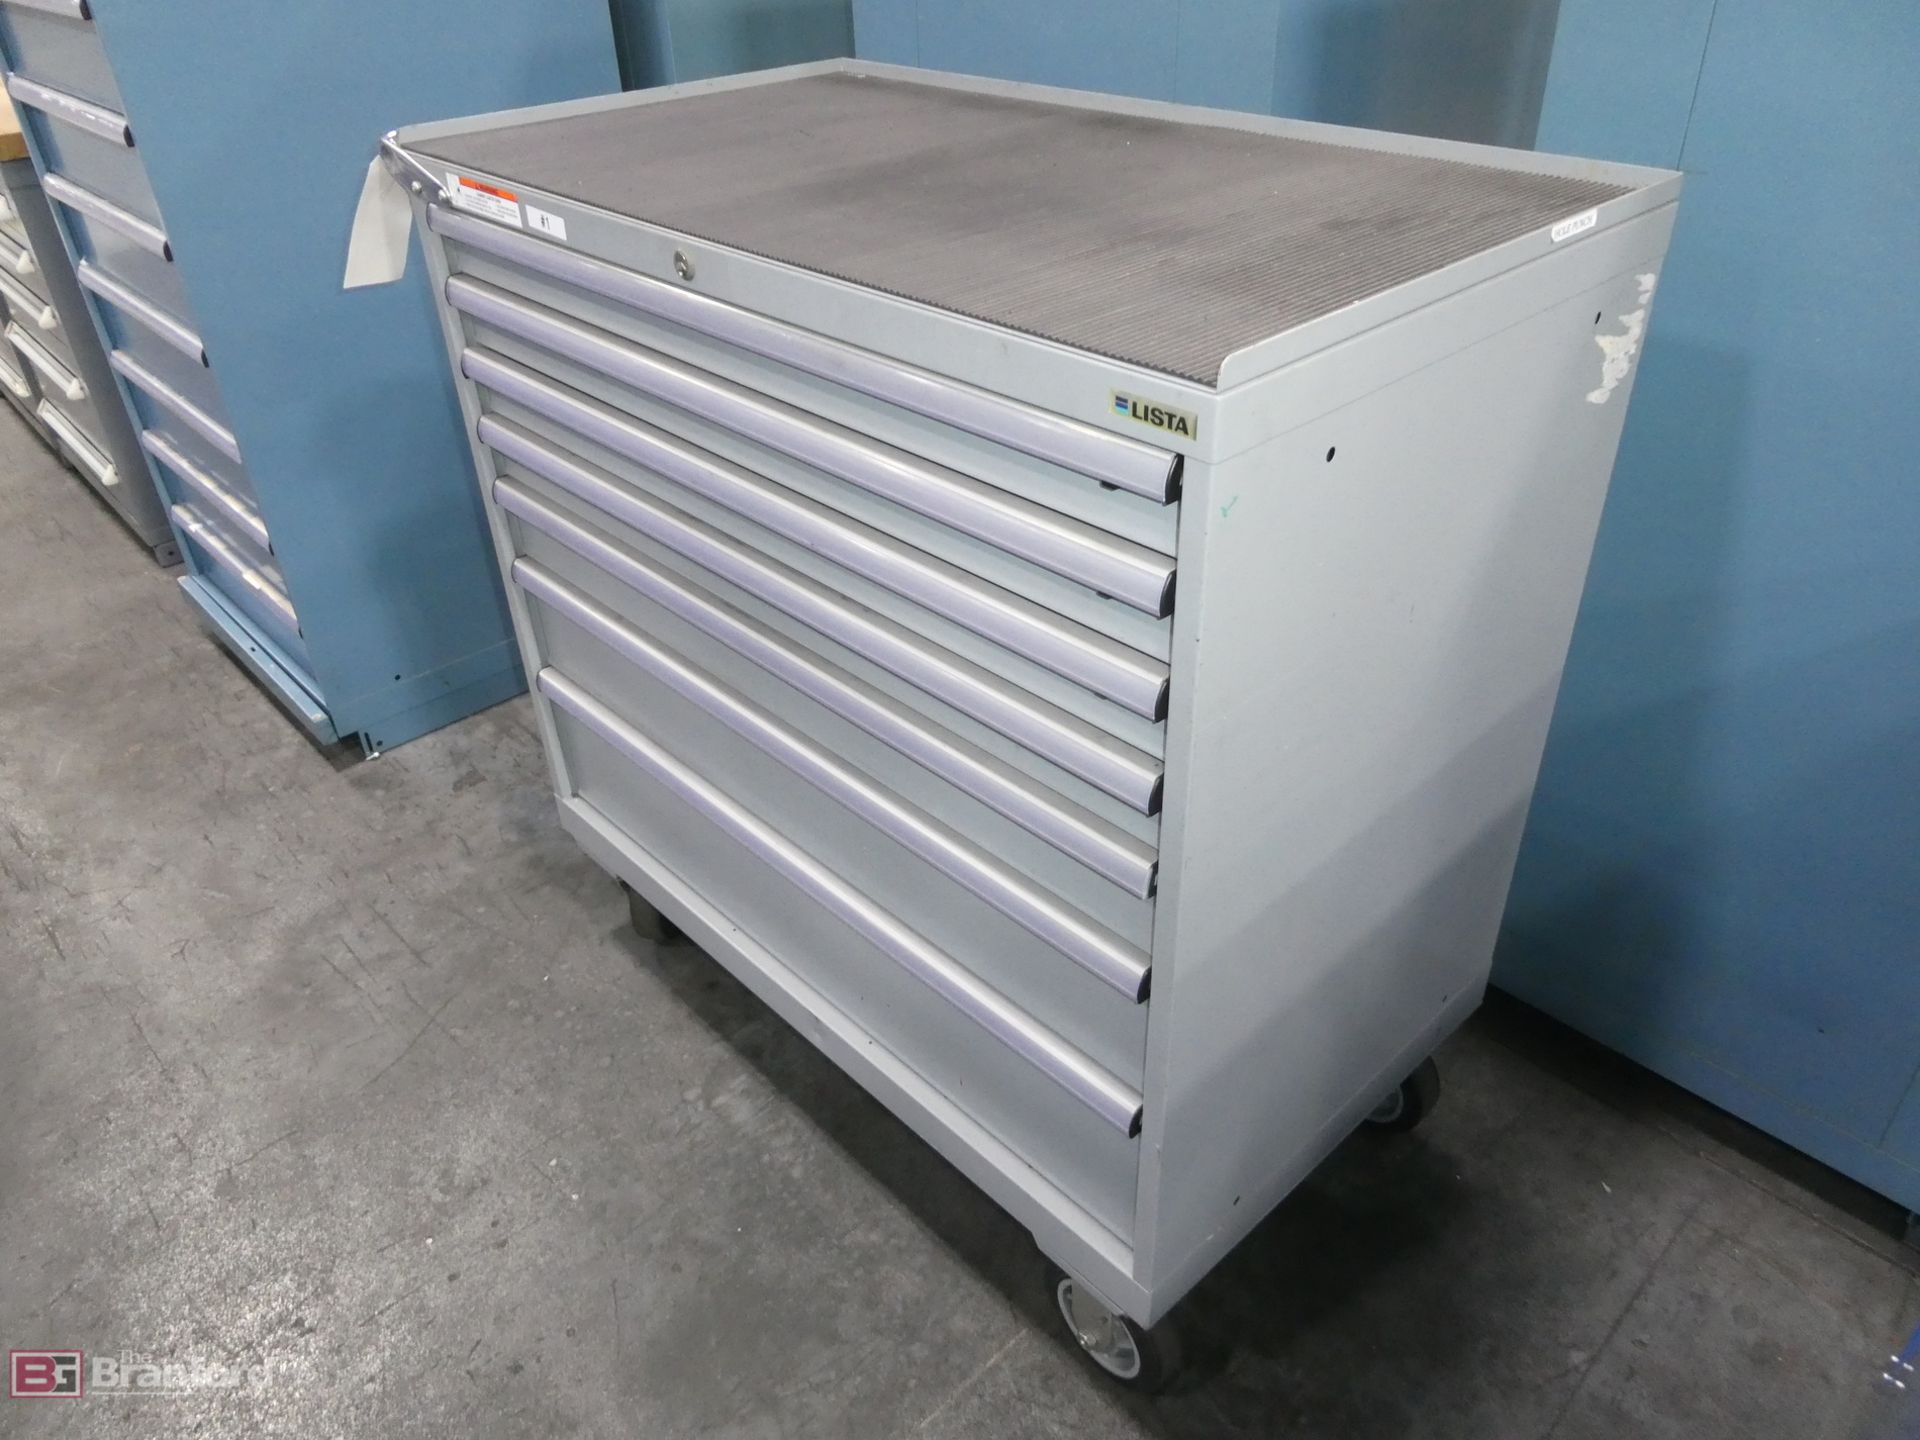 Lista 7-Drawer Portable Tool/Parts Cabinet - Image 4 of 5